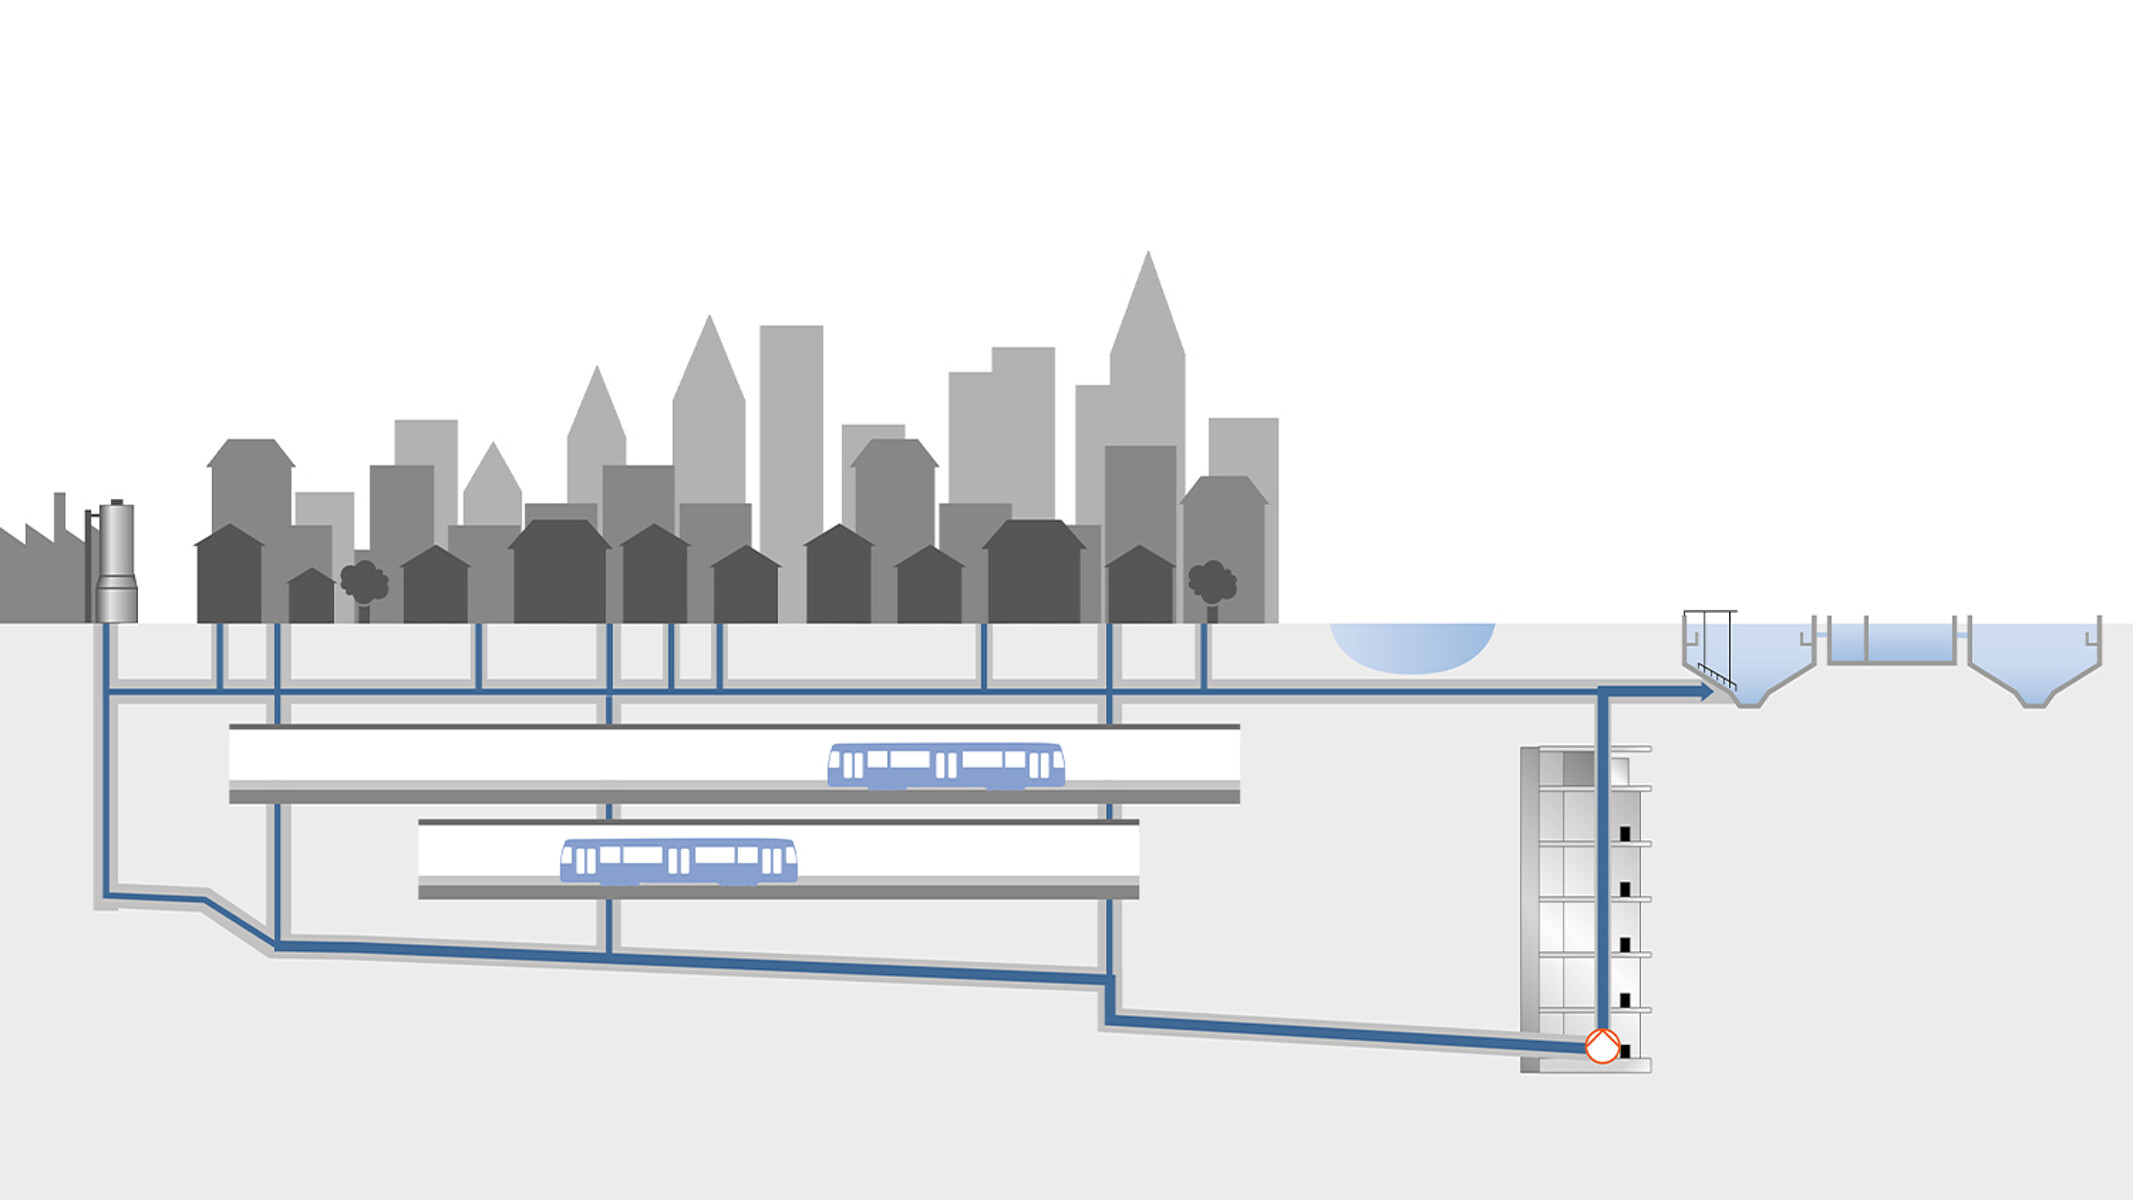 Diagram: the principle of draining combined sewers into deep tunnels below large cities